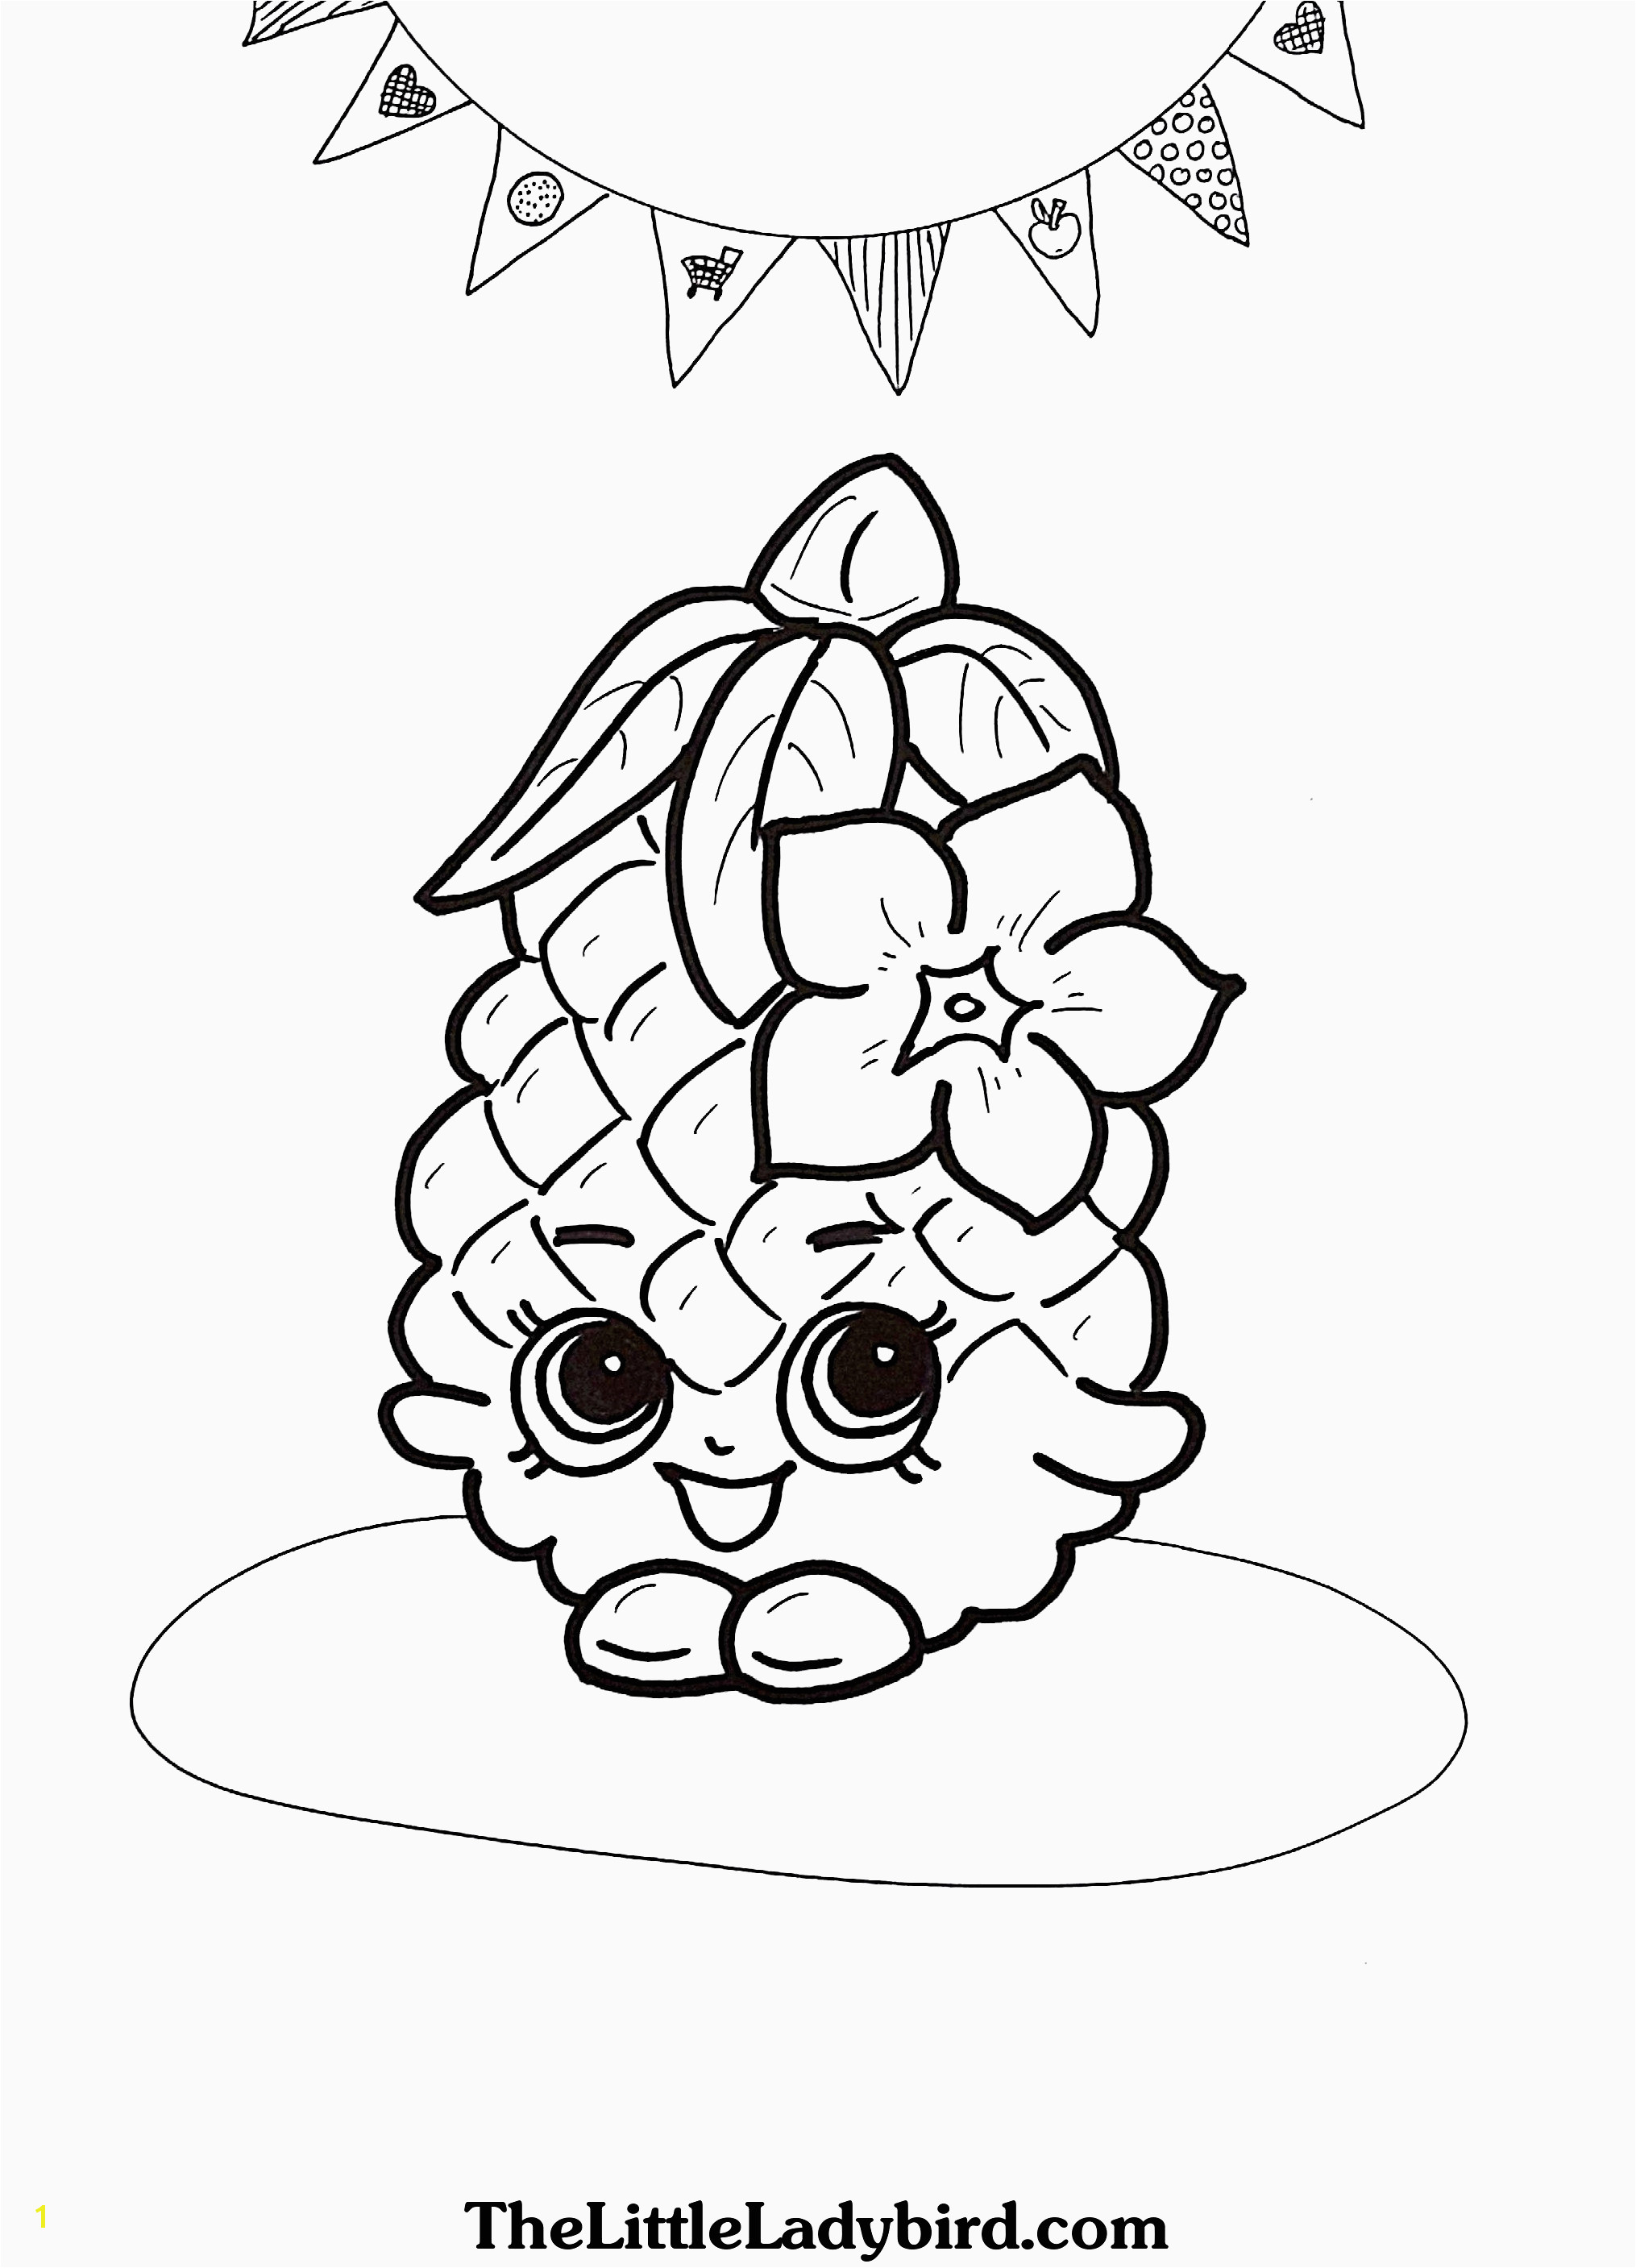 Alligator Gar Coloring Page Alligator Coloring Pages New Easy Spongebob Drawing